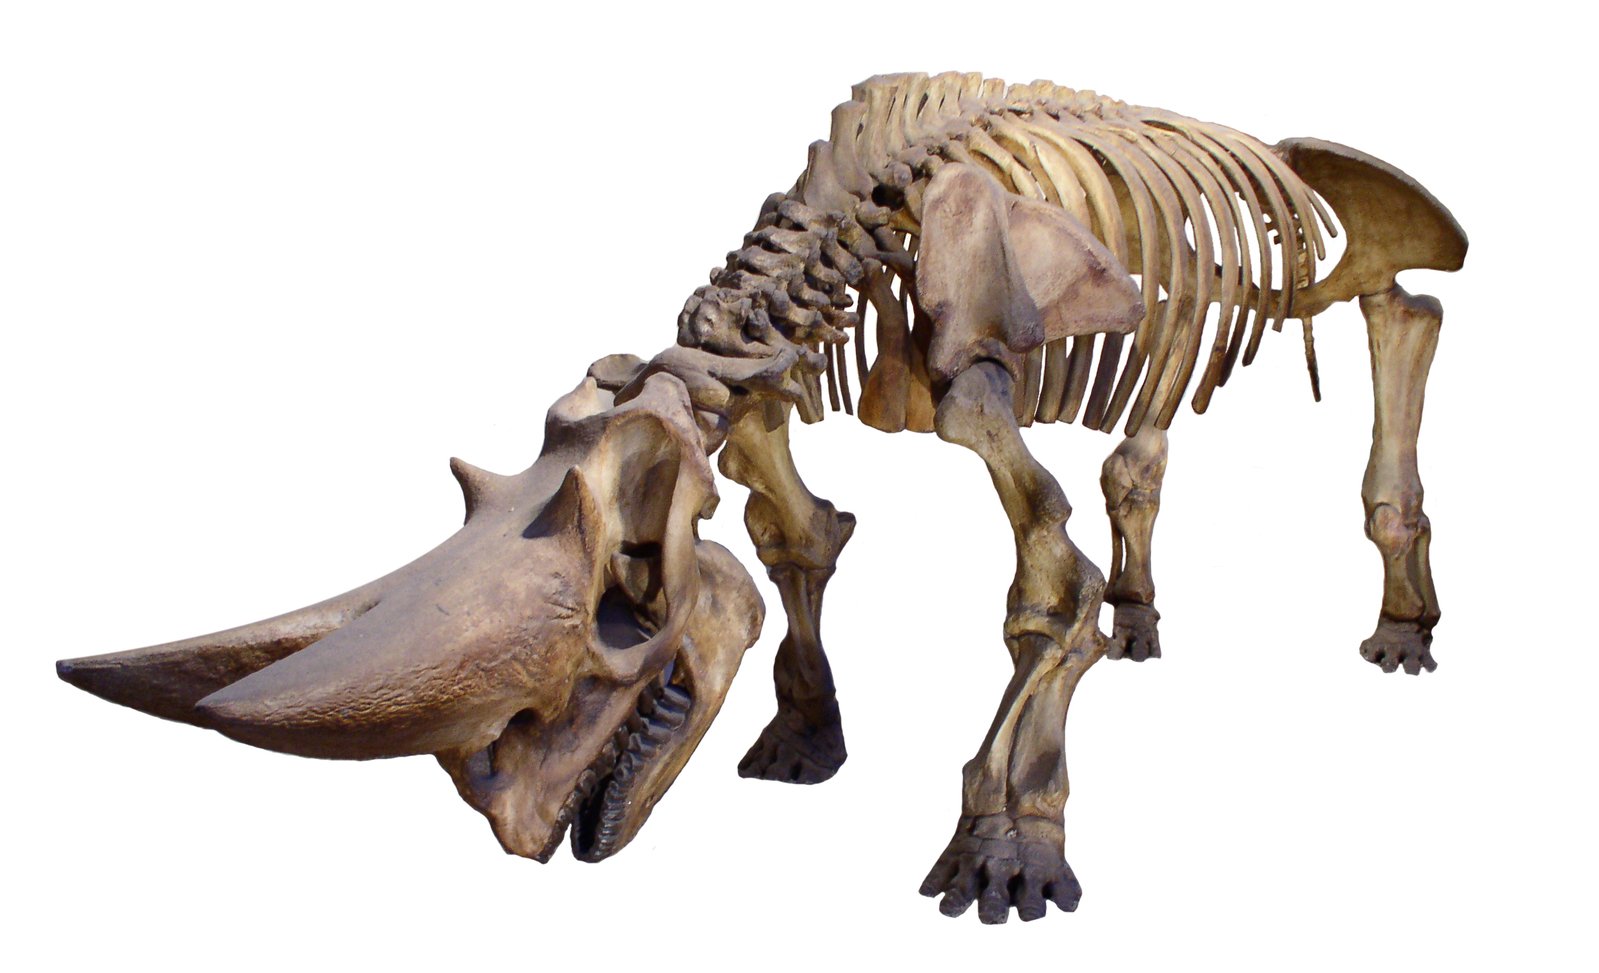 the skeleton of a large animal that is in full